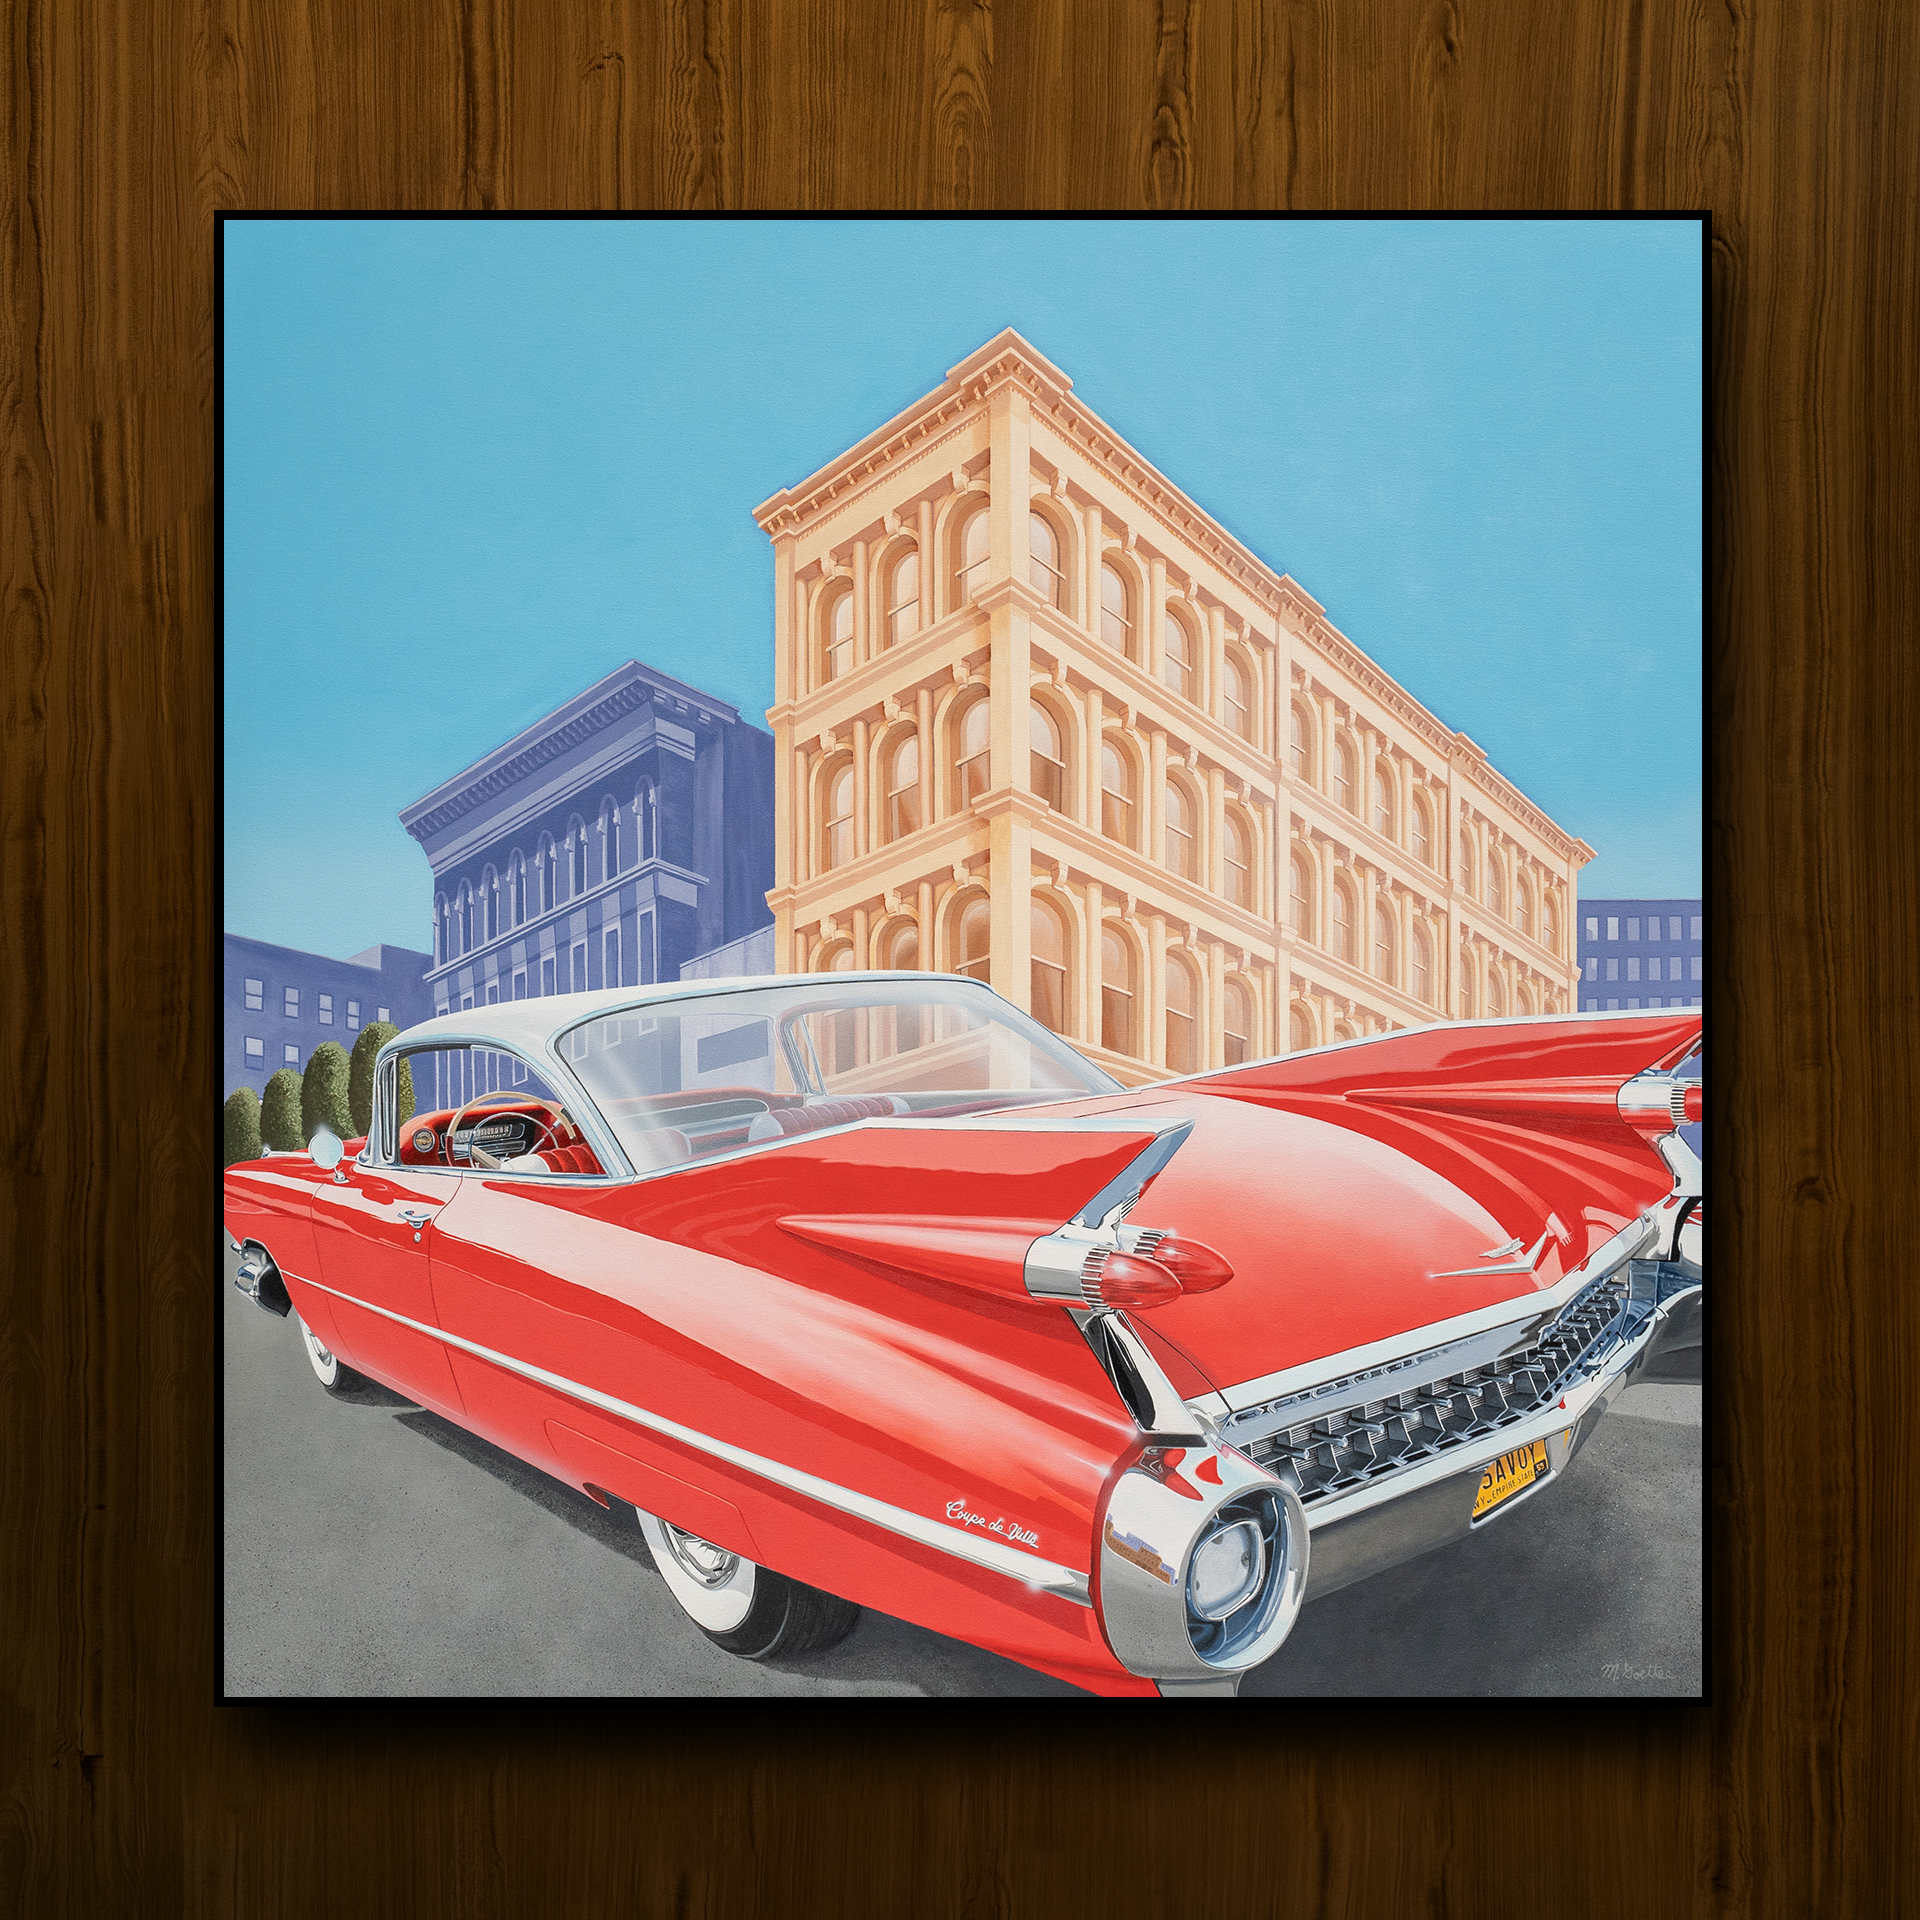 Michael Goettee (b. 1947), Four For The Road Series: 1959 Cadillac Coupe deVille , 2021, Acrylic on Canvas, 60" x 60"